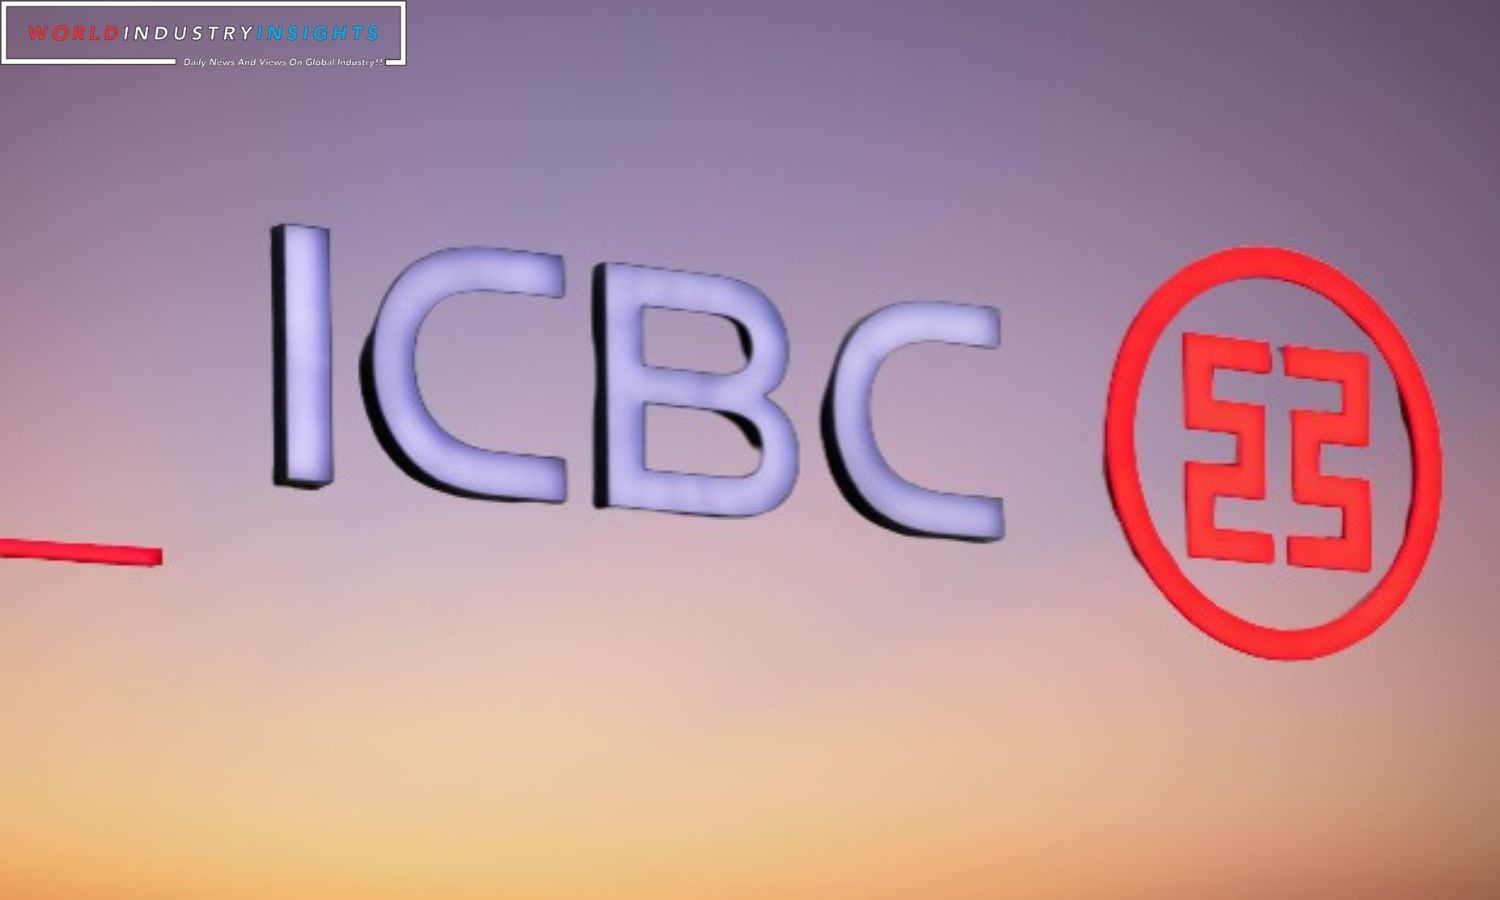 ICBC US Arm Hit by Ransomware